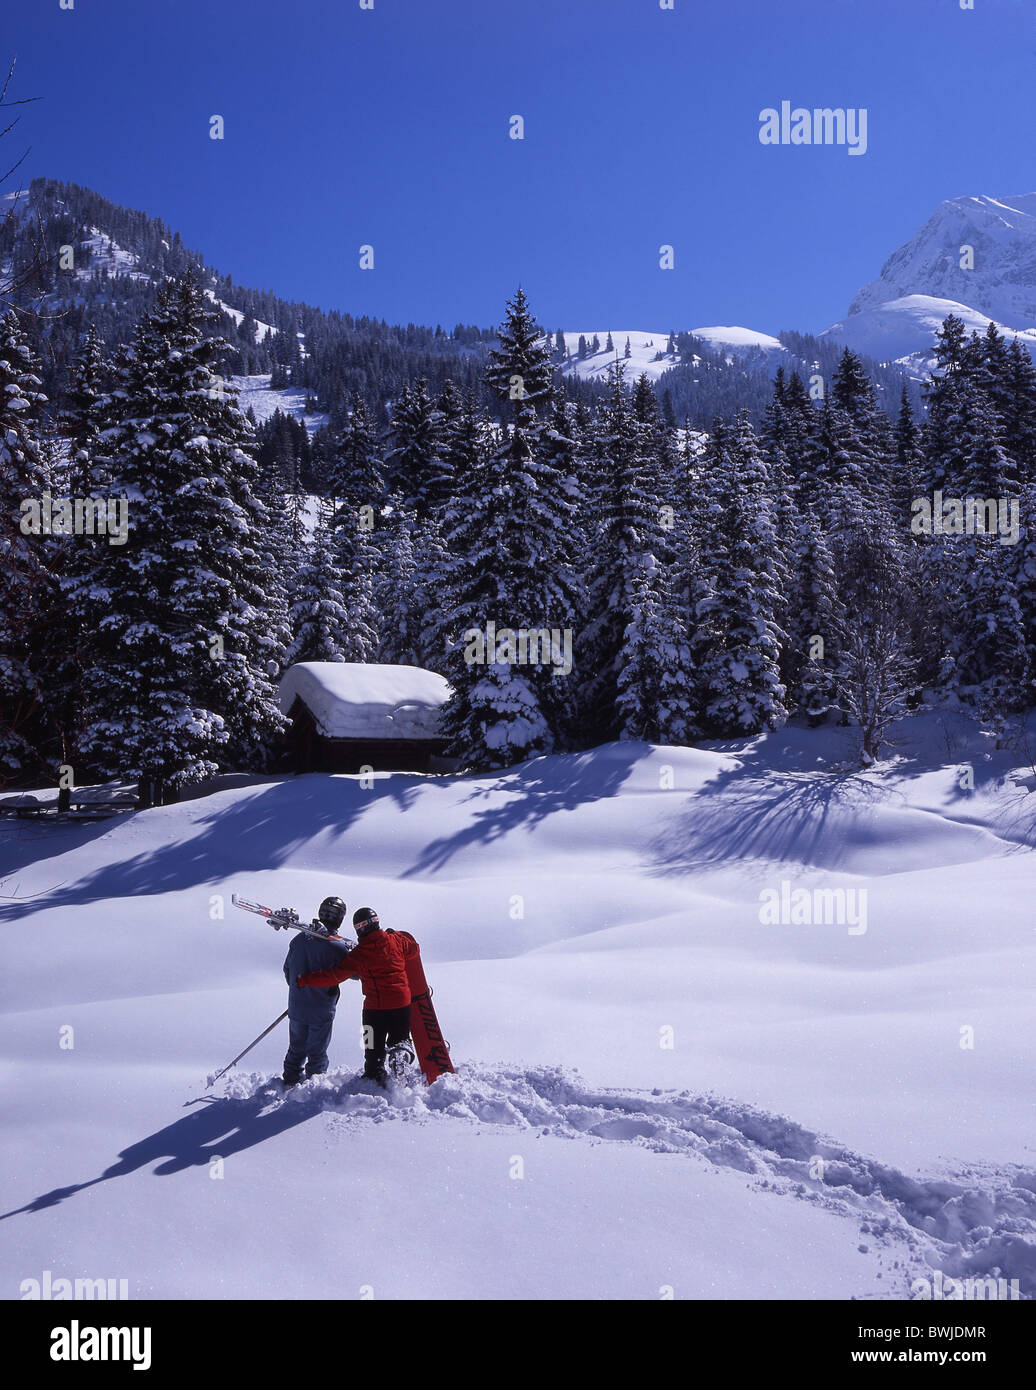 couple two persons holidays vacation ski skier skiing Snowboarder snowboard Snowboarding winter winter spo Stock Photo